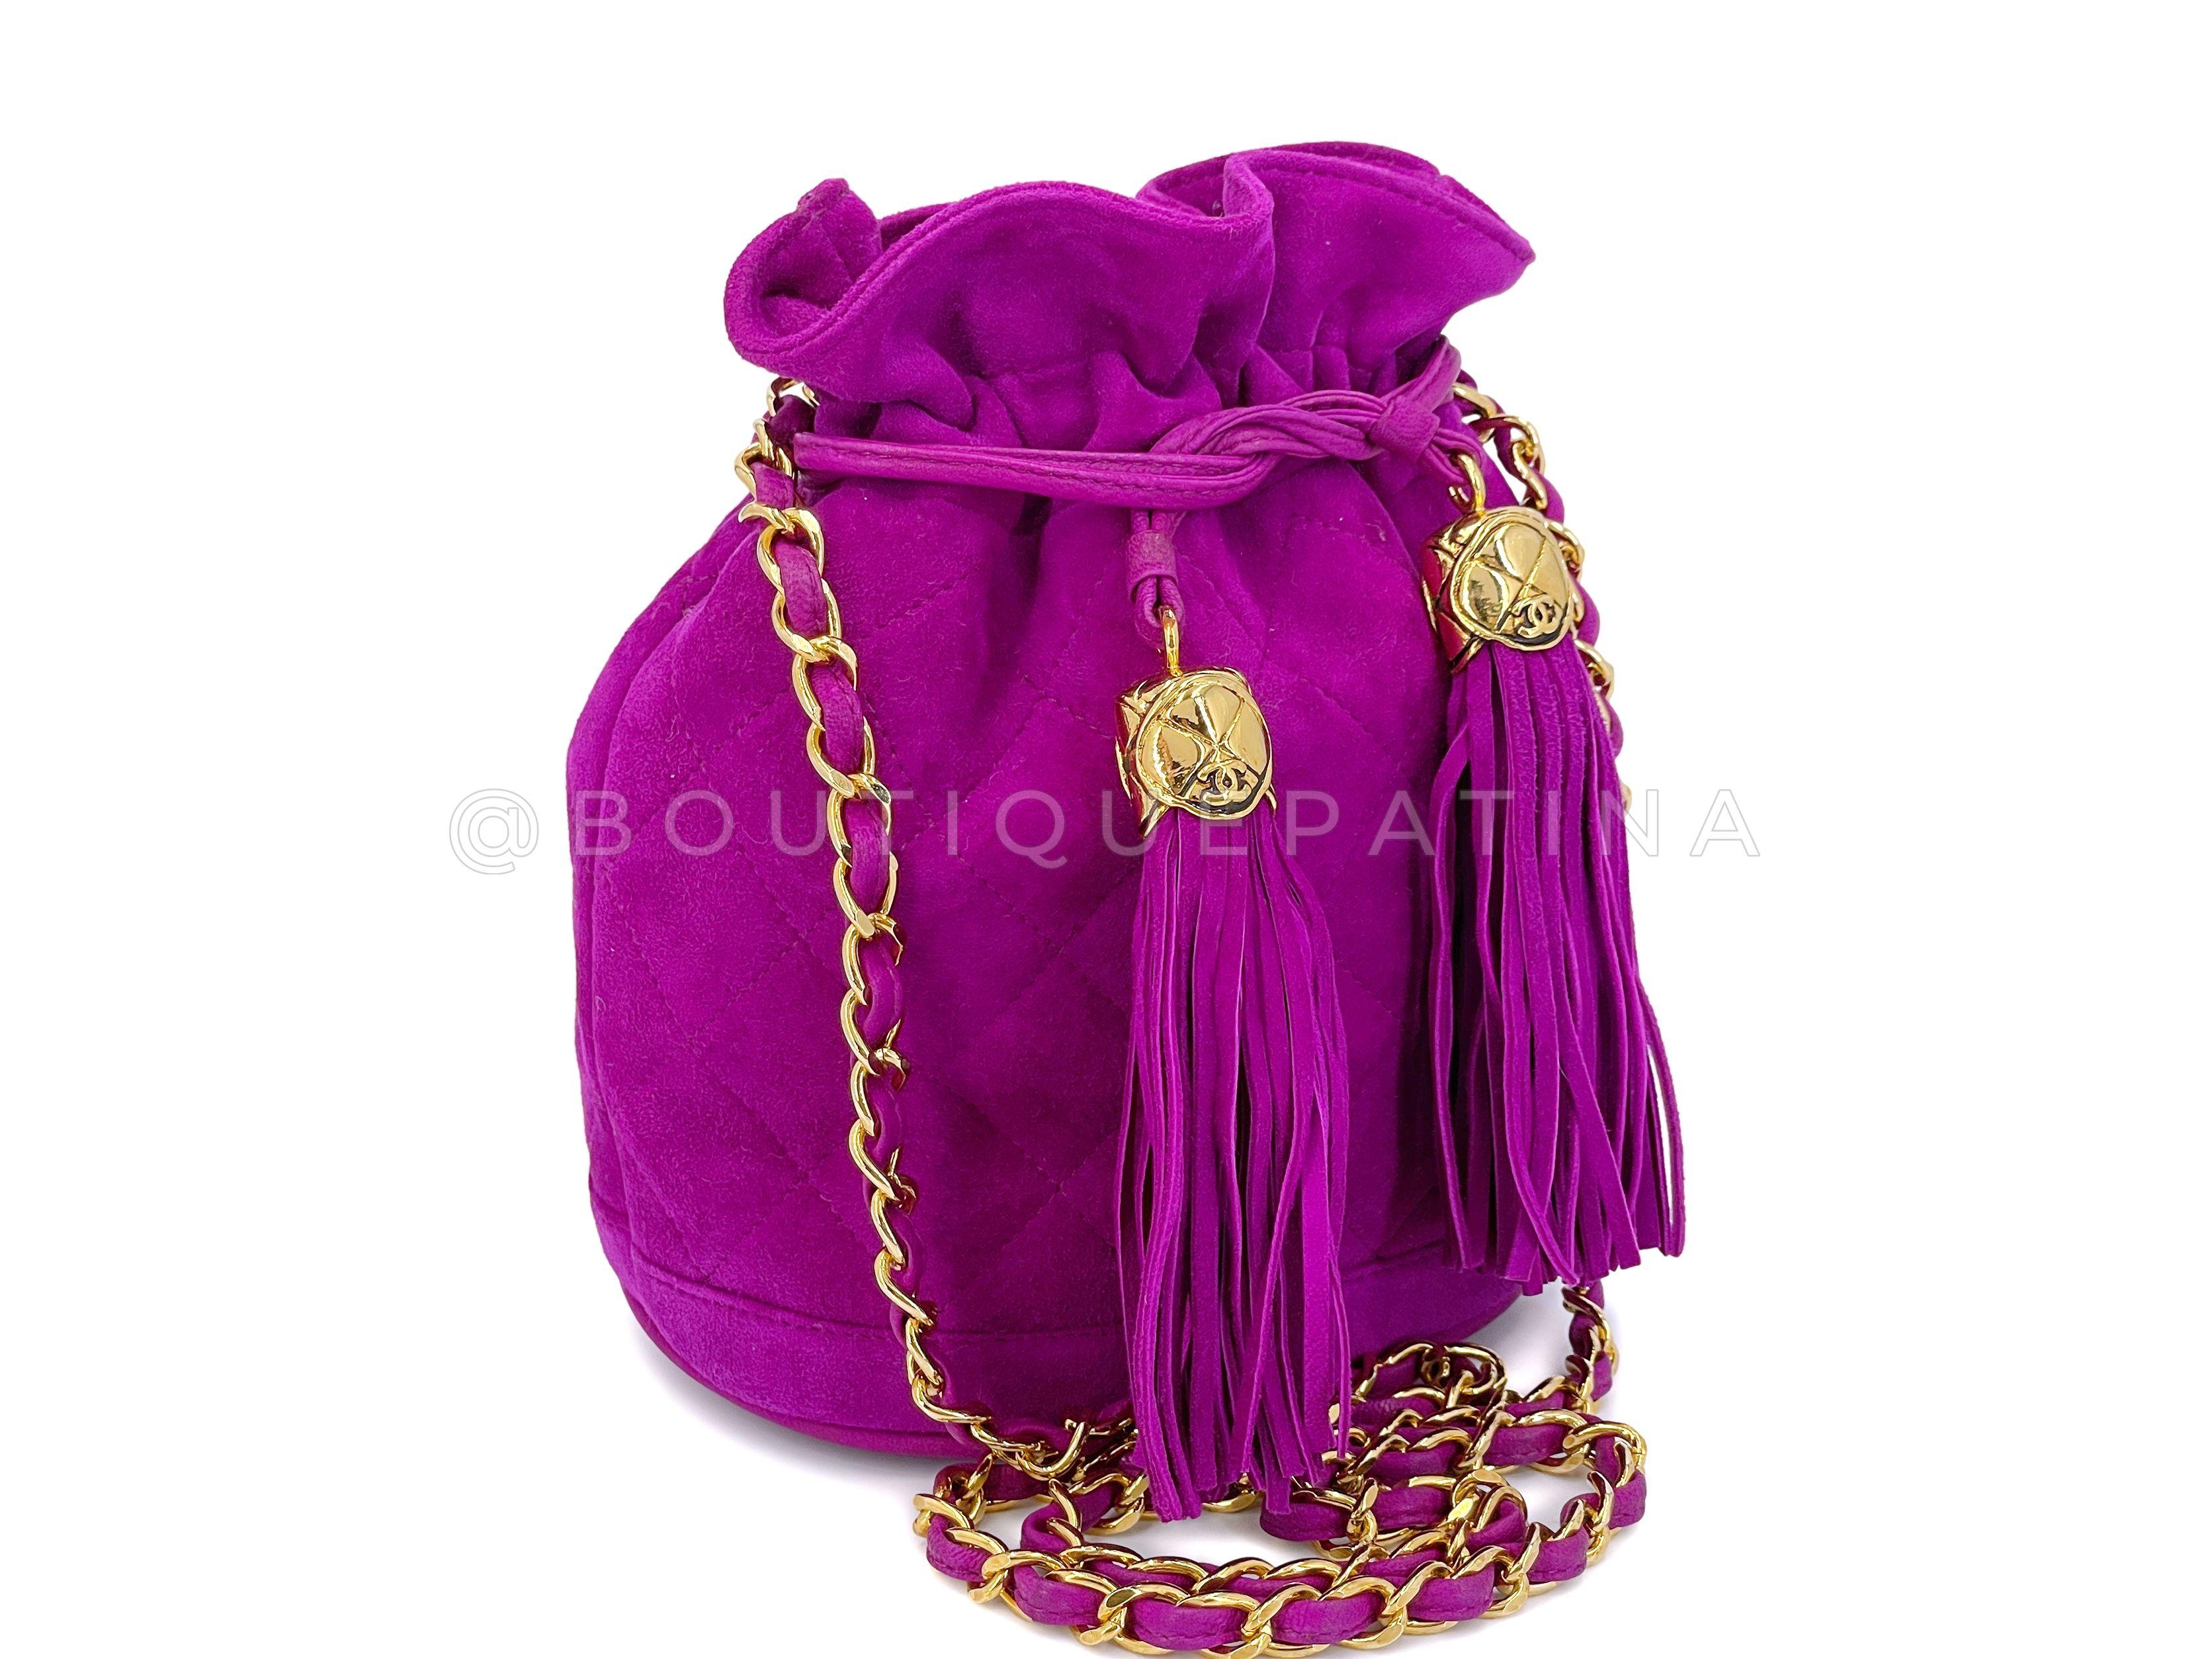 Store item: 67450
Rare Chanel 1990 Pink-Purple Suede Mini Drawstring Bucket Bag 24k GHW is a super rare collectible - not just for its color and material, but the condition. It is in nearly new condition, and one will be hard-pressed to ever find